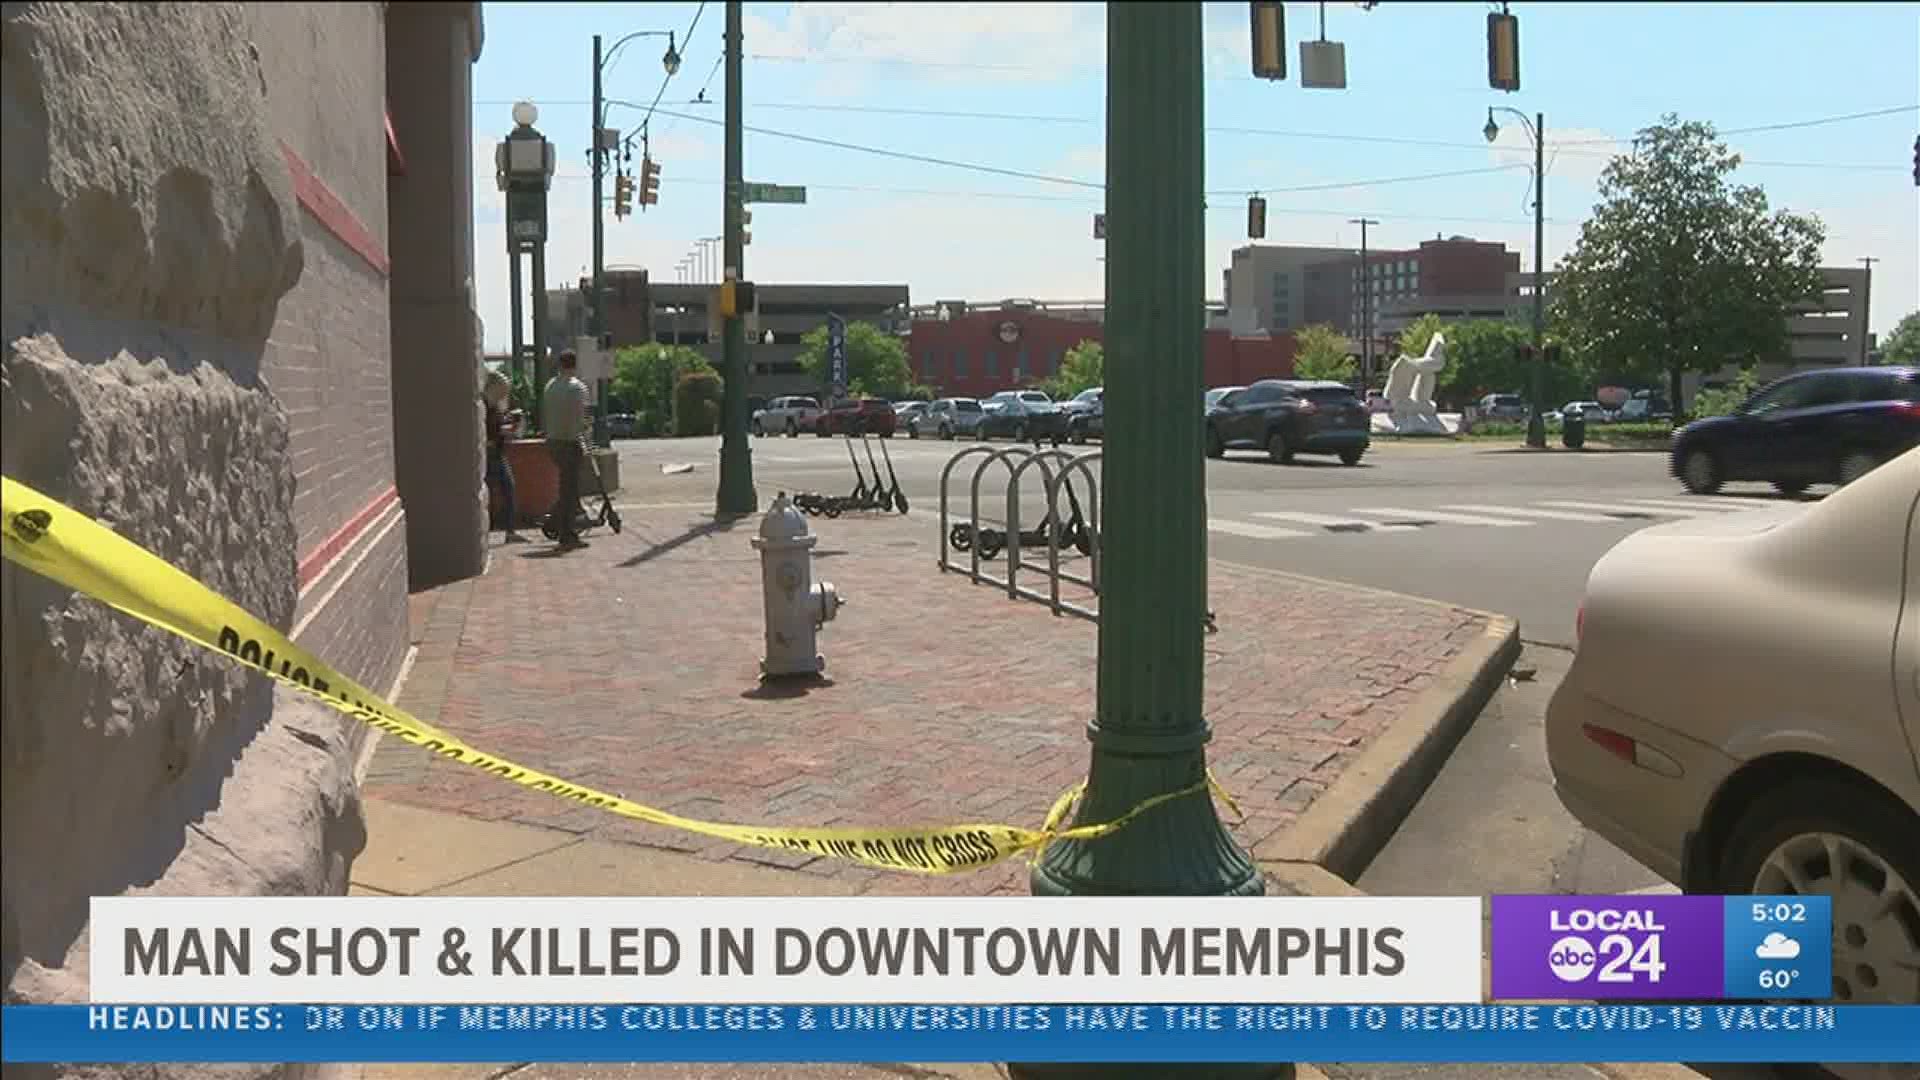 MPD says the victim was shot at the intersection of Main and Peabody.